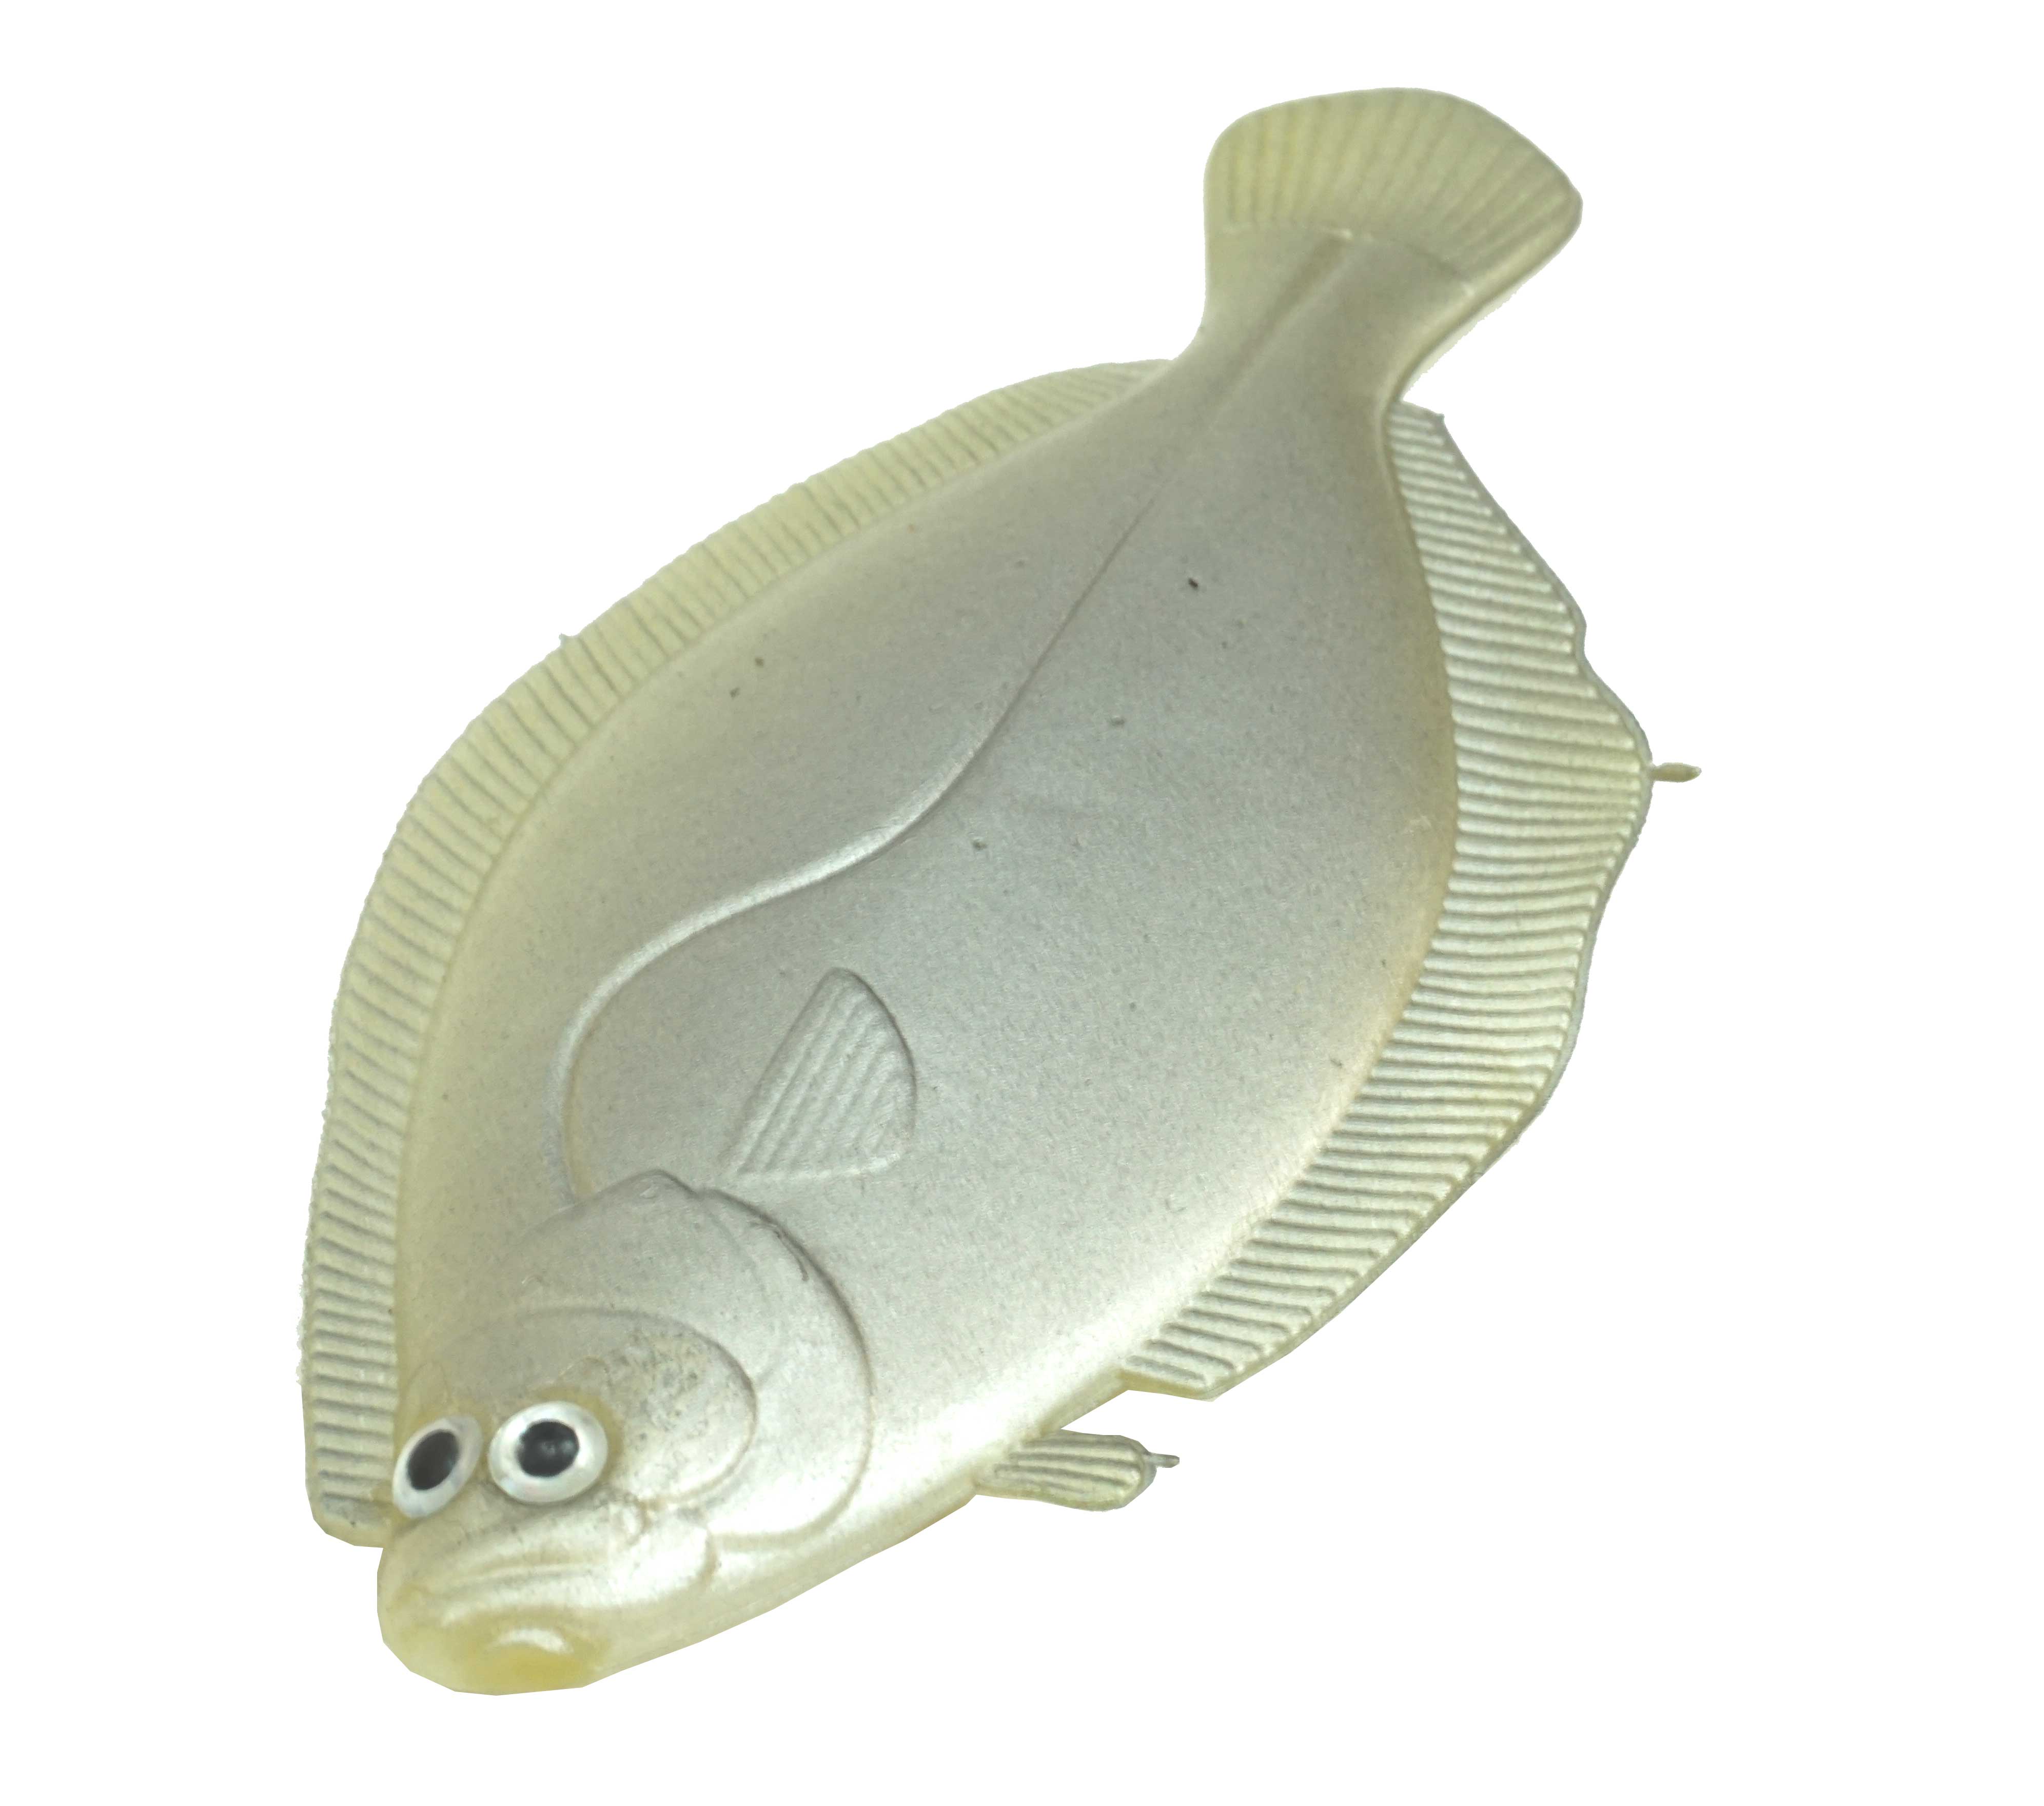 Artificial Flounder 5" Light Gray - Almost Alive Lures - Click Image to Close